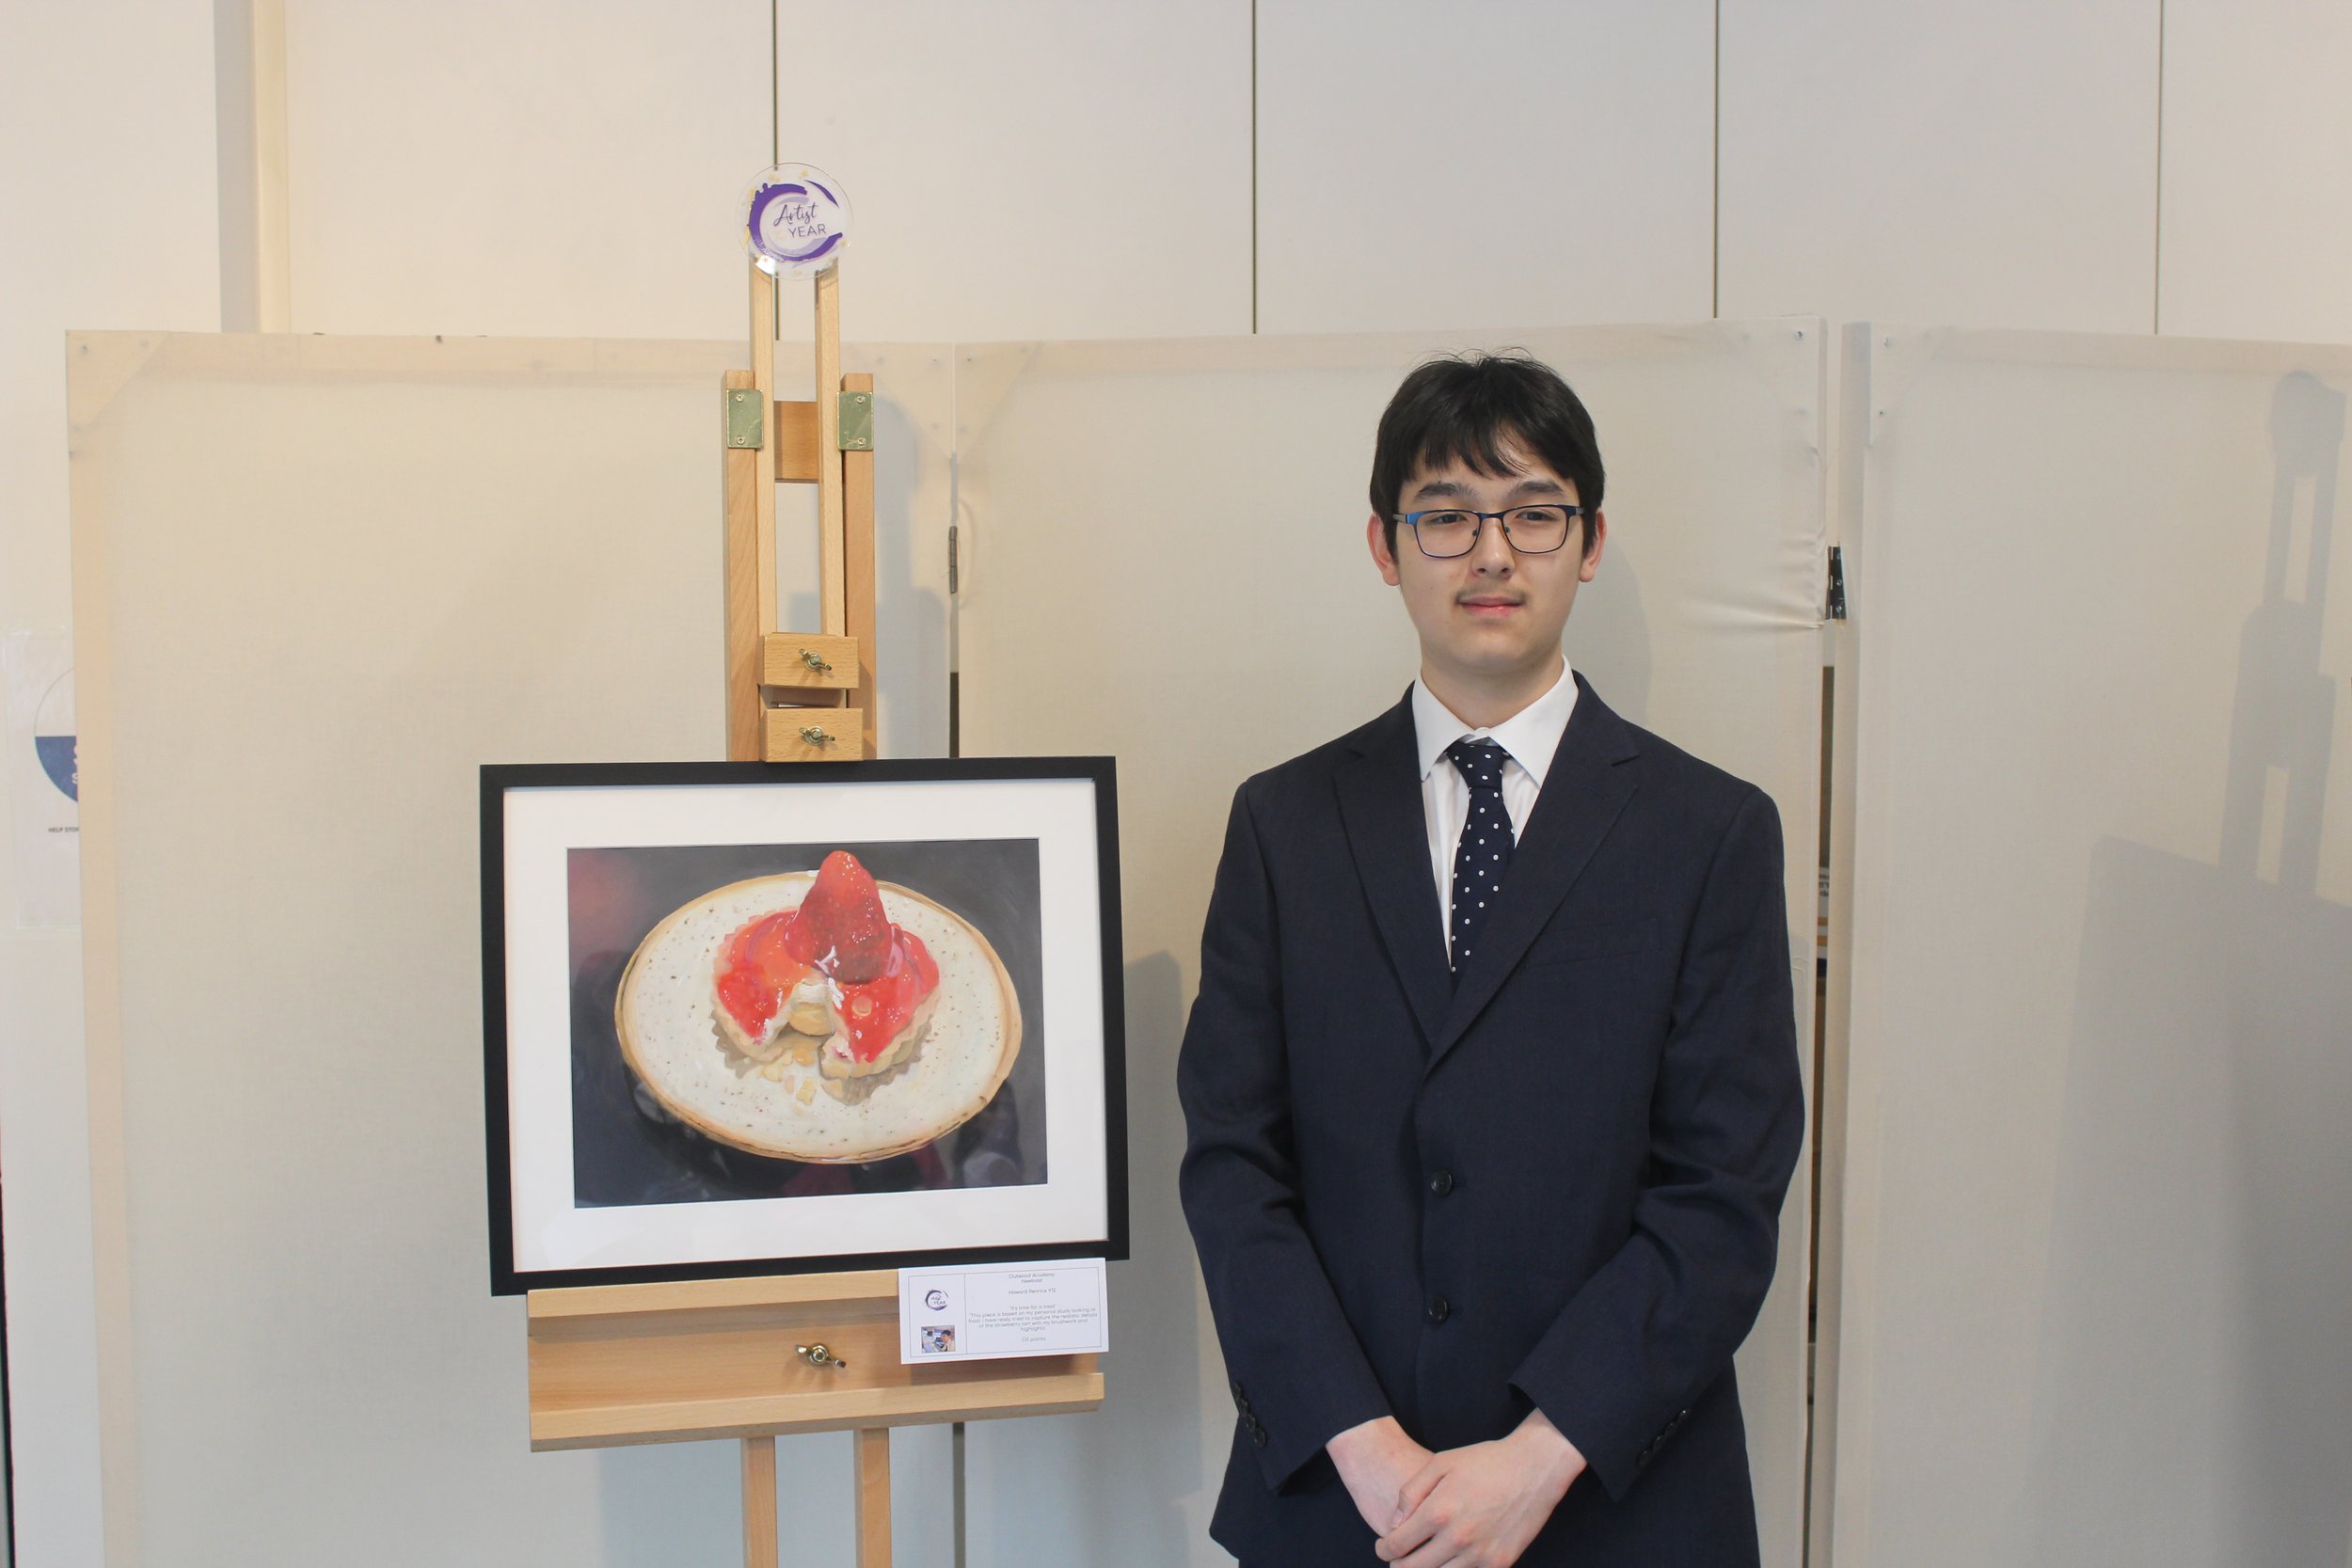 OGAT AOTY student with artwork 3.JPG